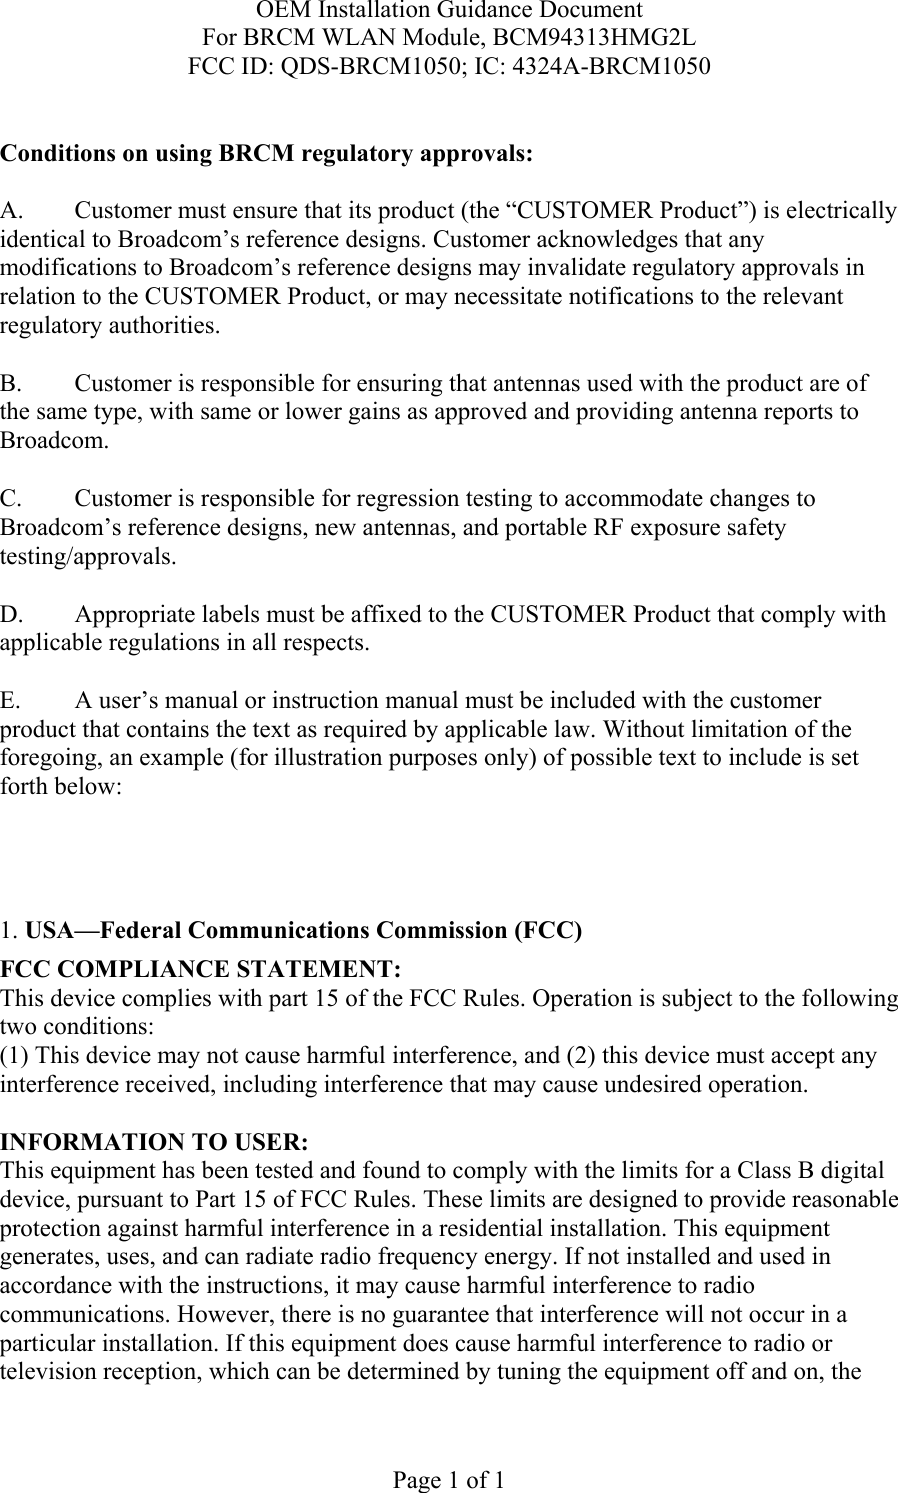 OEM Installation Guidance Document For BRCM WLAN Module, BCM94313HMG2L FCC ID: QDS-BRCM1050; IC: 4324A-BRCM1050  Page 1 of 1  Conditions on using BRCM regulatory approvals:   A.  Customer must ensure that its product (the “CUSTOMER Product”) is electrically identical to Broadcom’s reference designs. Customer acknowledges that any modifications to Broadcom’s reference designs may invalidate regulatory approvals in relation to the CUSTOMER Product, or may necessitate notifications to the relevant regulatory authorities.  B.   Customer is responsible for ensuring that antennas used with the product are of the same type, with same or lower gains as approved and providing antenna reports to Broadcom.  C.   Customer is responsible for regression testing to accommodate changes to Broadcom’s reference designs, new antennas, and portable RF exposure safety testing/approvals.  D.  Appropriate labels must be affixed to the CUSTOMER Product that comply with applicable regulations in all respects.    E.  A user’s manual or instruction manual must be included with the customer product that contains the text as required by applicable law. Without limitation of the foregoing, an example (for illustration purposes only) of possible text to include is set forth below:      1. USA—Federal Communications Commission (FCC) FCC COMPLIANCE STATEMENT: This device complies with part 15 of the FCC Rules. Operation is subject to the following two conditions: (1) This device may not cause harmful interference, and (2) this device must accept any interference received, including interference that may cause undesired operation.  INFORMATION TO USER: This equipment has been tested and found to comply with the limits for a Class B digital device, pursuant to Part 15 of FCC Rules. These limits are designed to provide reasonable protection against harmful interference in a residential installation. This equipment generates, uses, and can radiate radio frequency energy. If not installed and used in accordance with the instructions, it may cause harmful interference to radio communications. However, there is no guarantee that interference will not occur in a particular installation. If this equipment does cause harmful interference to radio or television reception, which can be determined by tuning the equipment off and on, the 